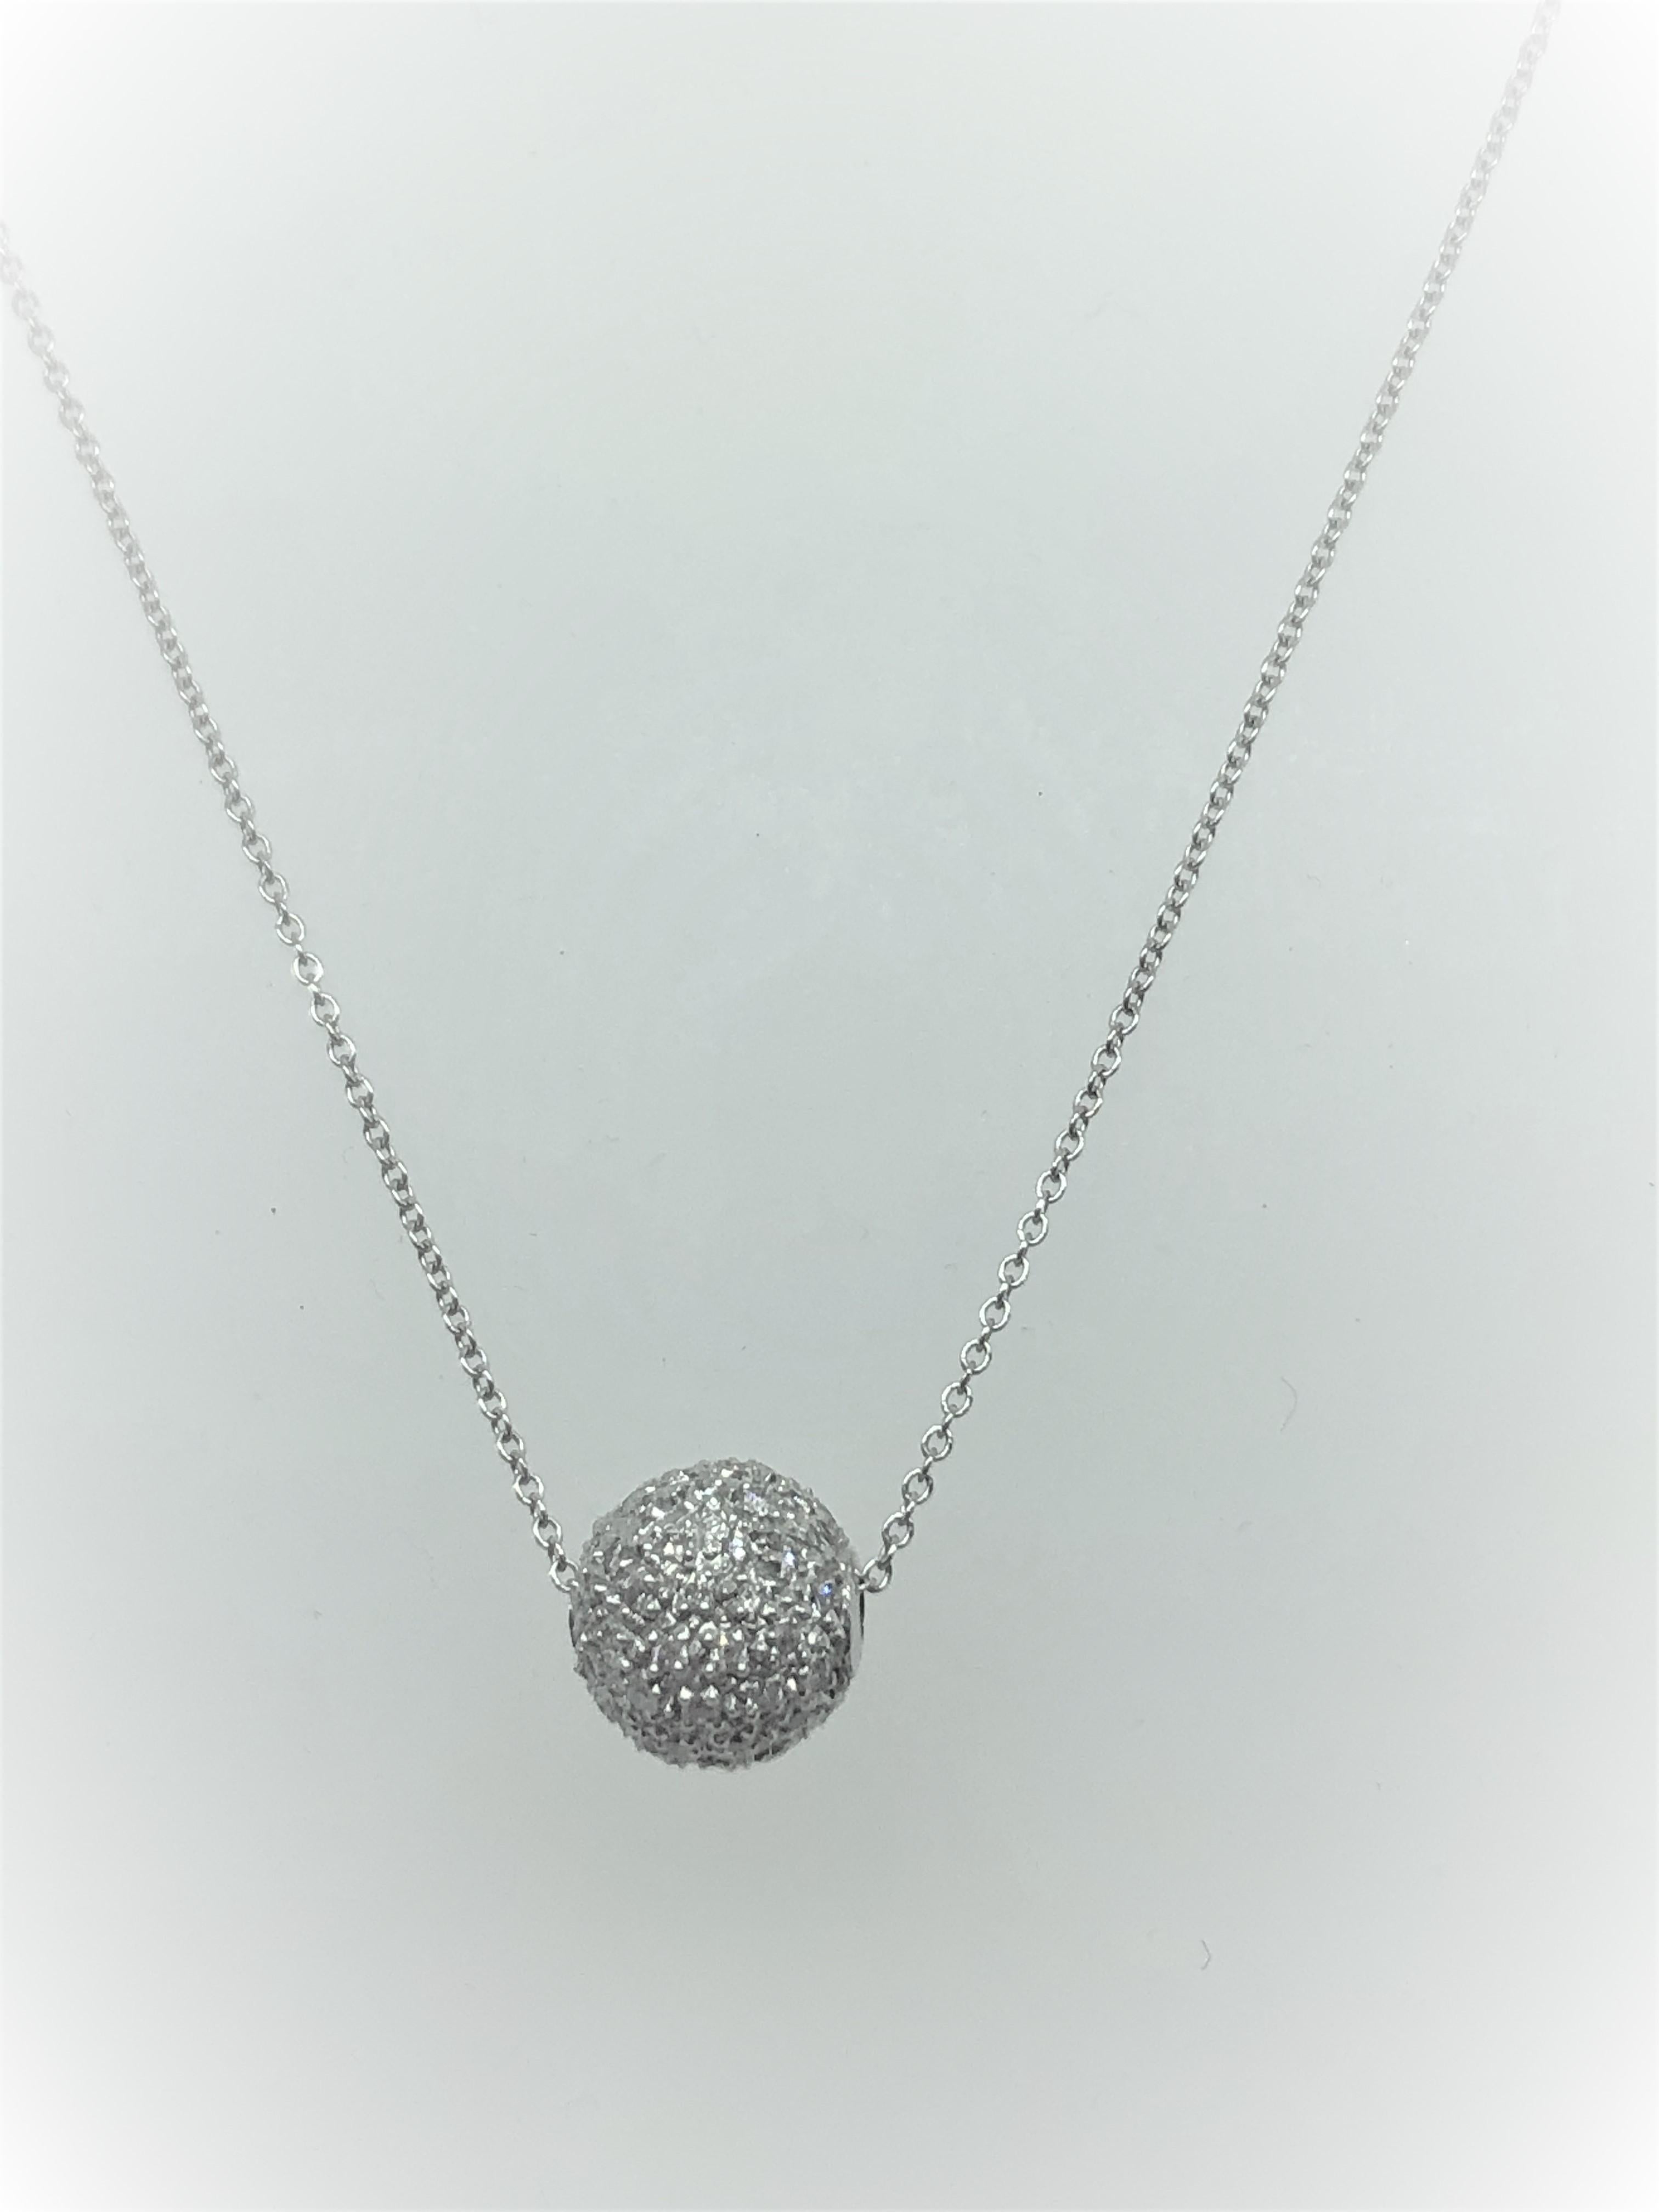 Diamond Pave Ball Pendant 0.85 carats

Total Carat Weight of Diamond 0.85 carats

F/G Color VS Clarity

Diamond Ball measures 11.0mm

Set in 14K White Gold

With 16